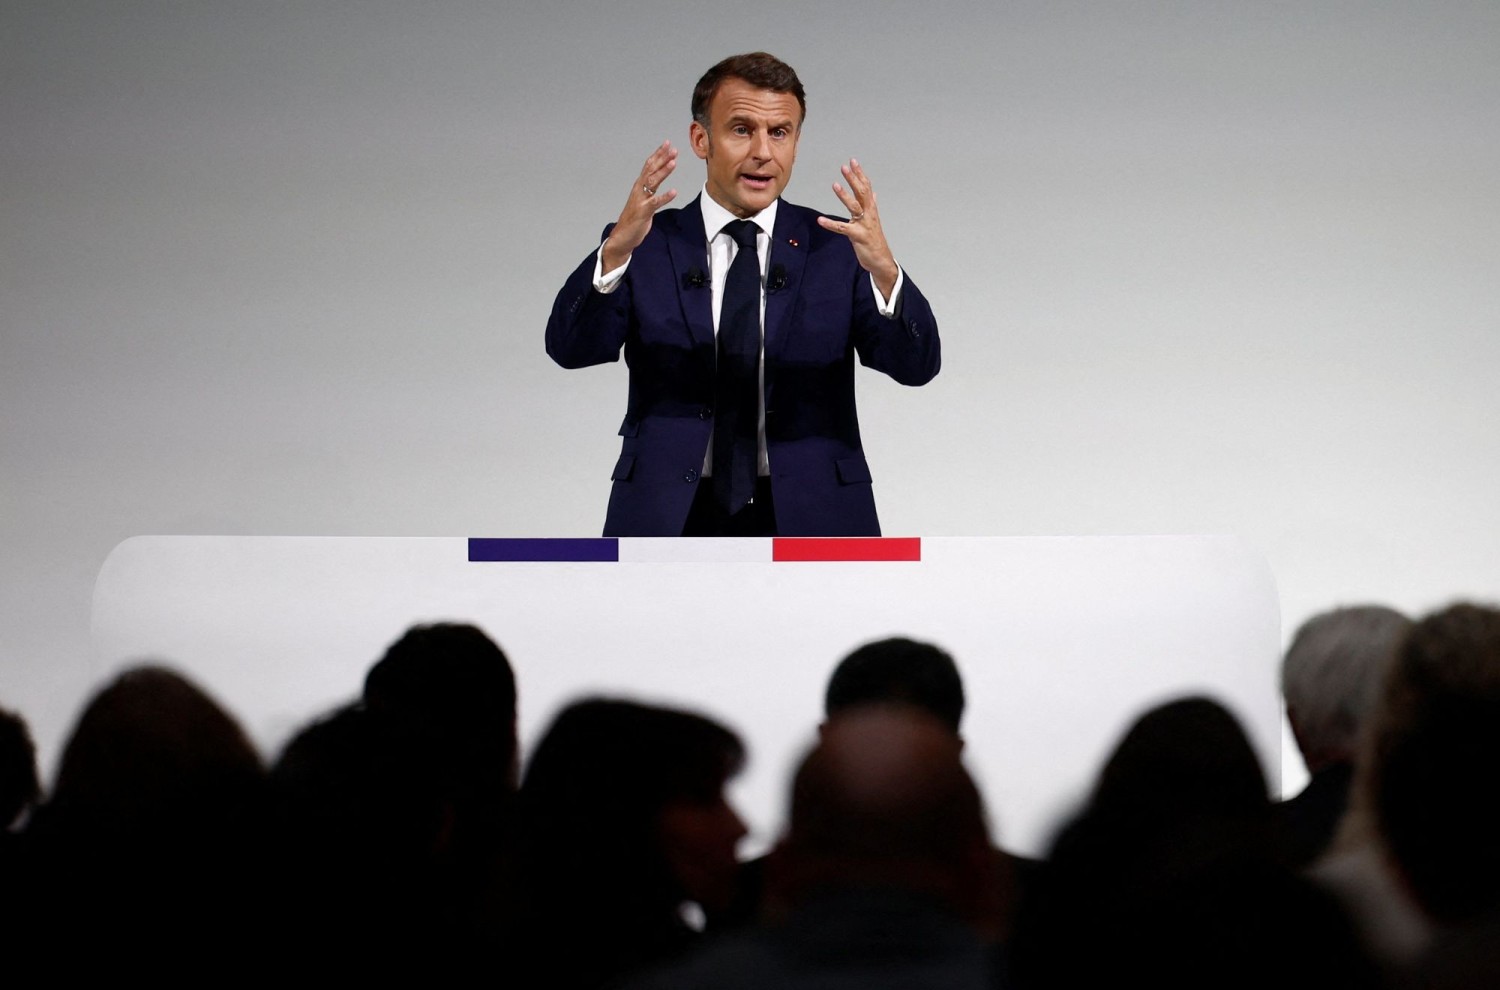 French President Emmanuel Macron at a Paris news conference Wednesday ahead of the early legislative elections. STEPHANE MAHE/REUTERS